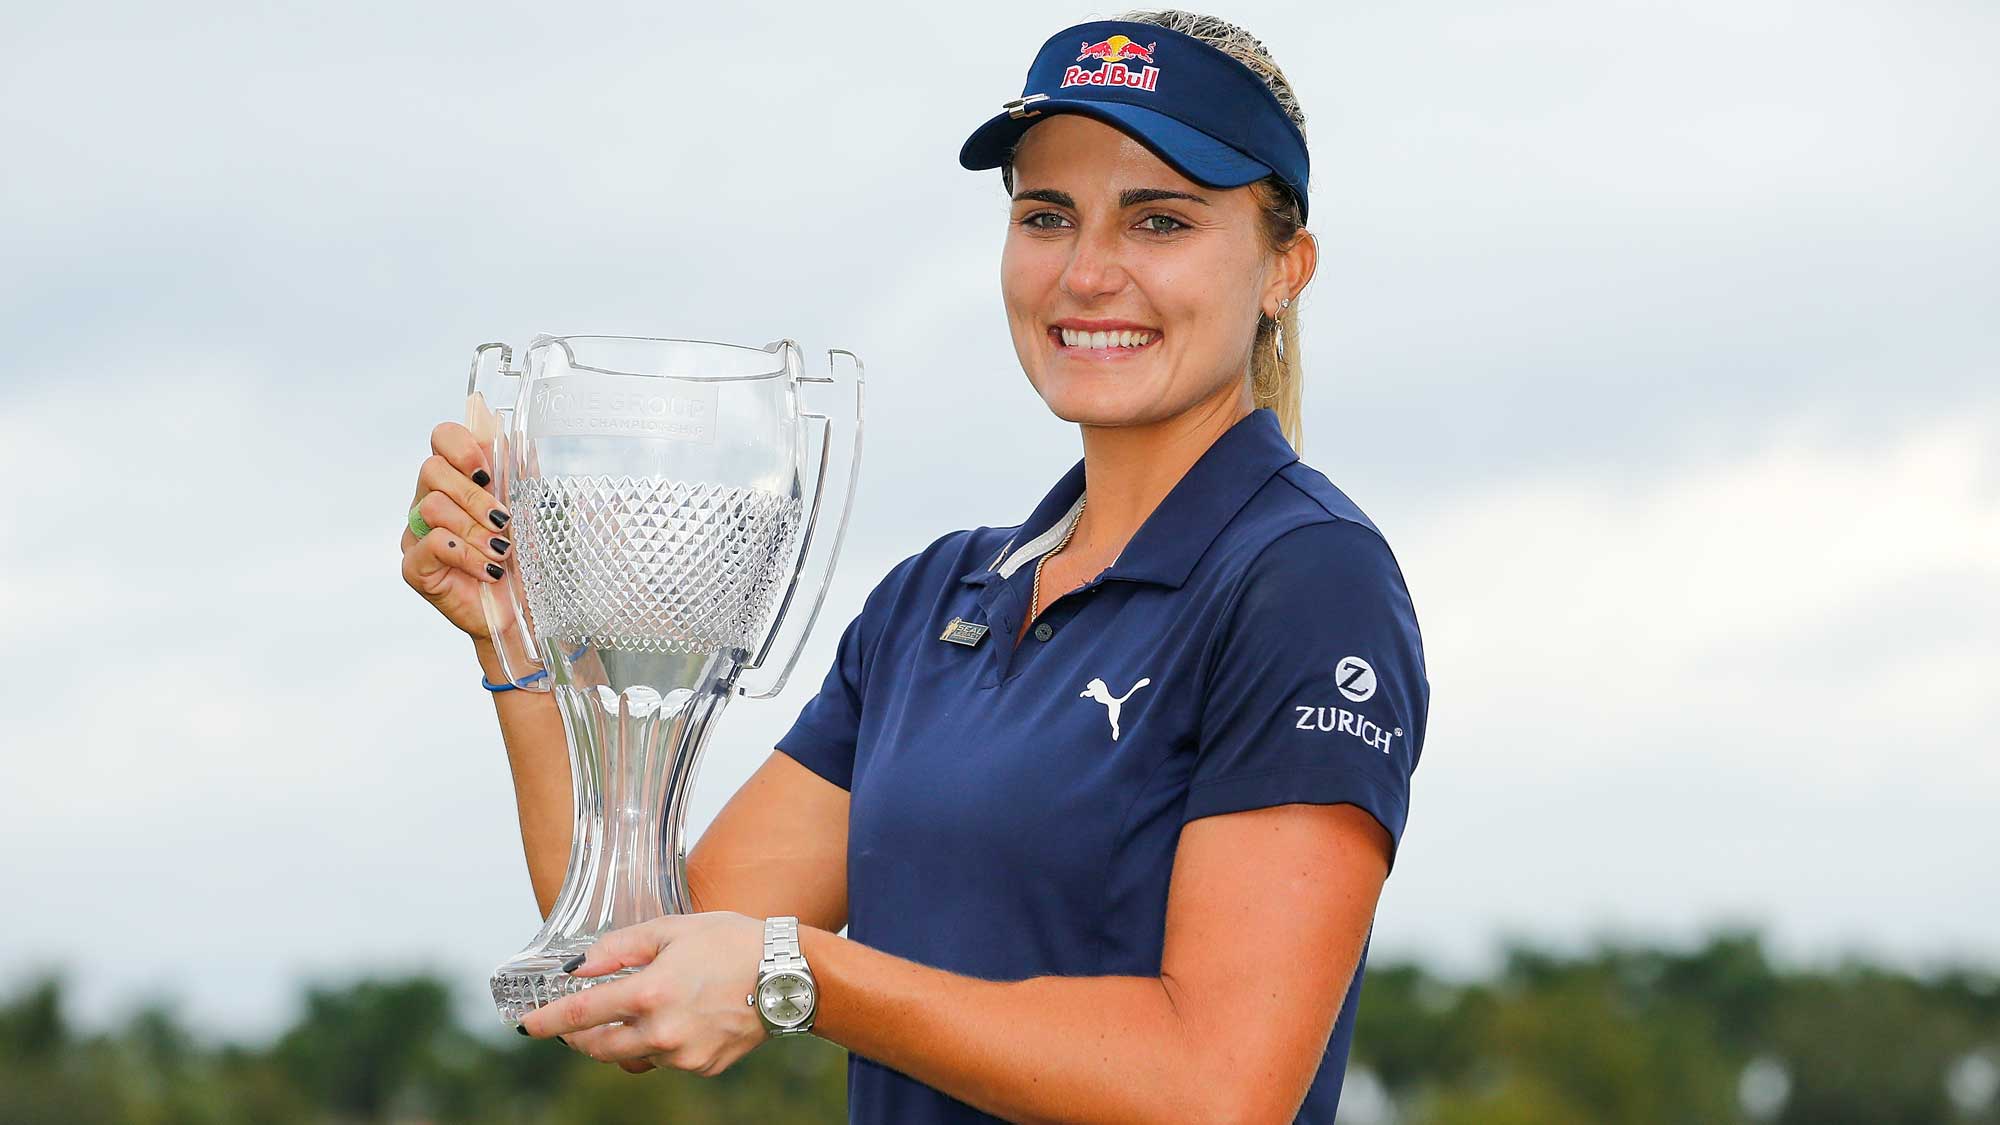 Lexi Thompson poses for a photo with the CME Group Tour Championship trophy